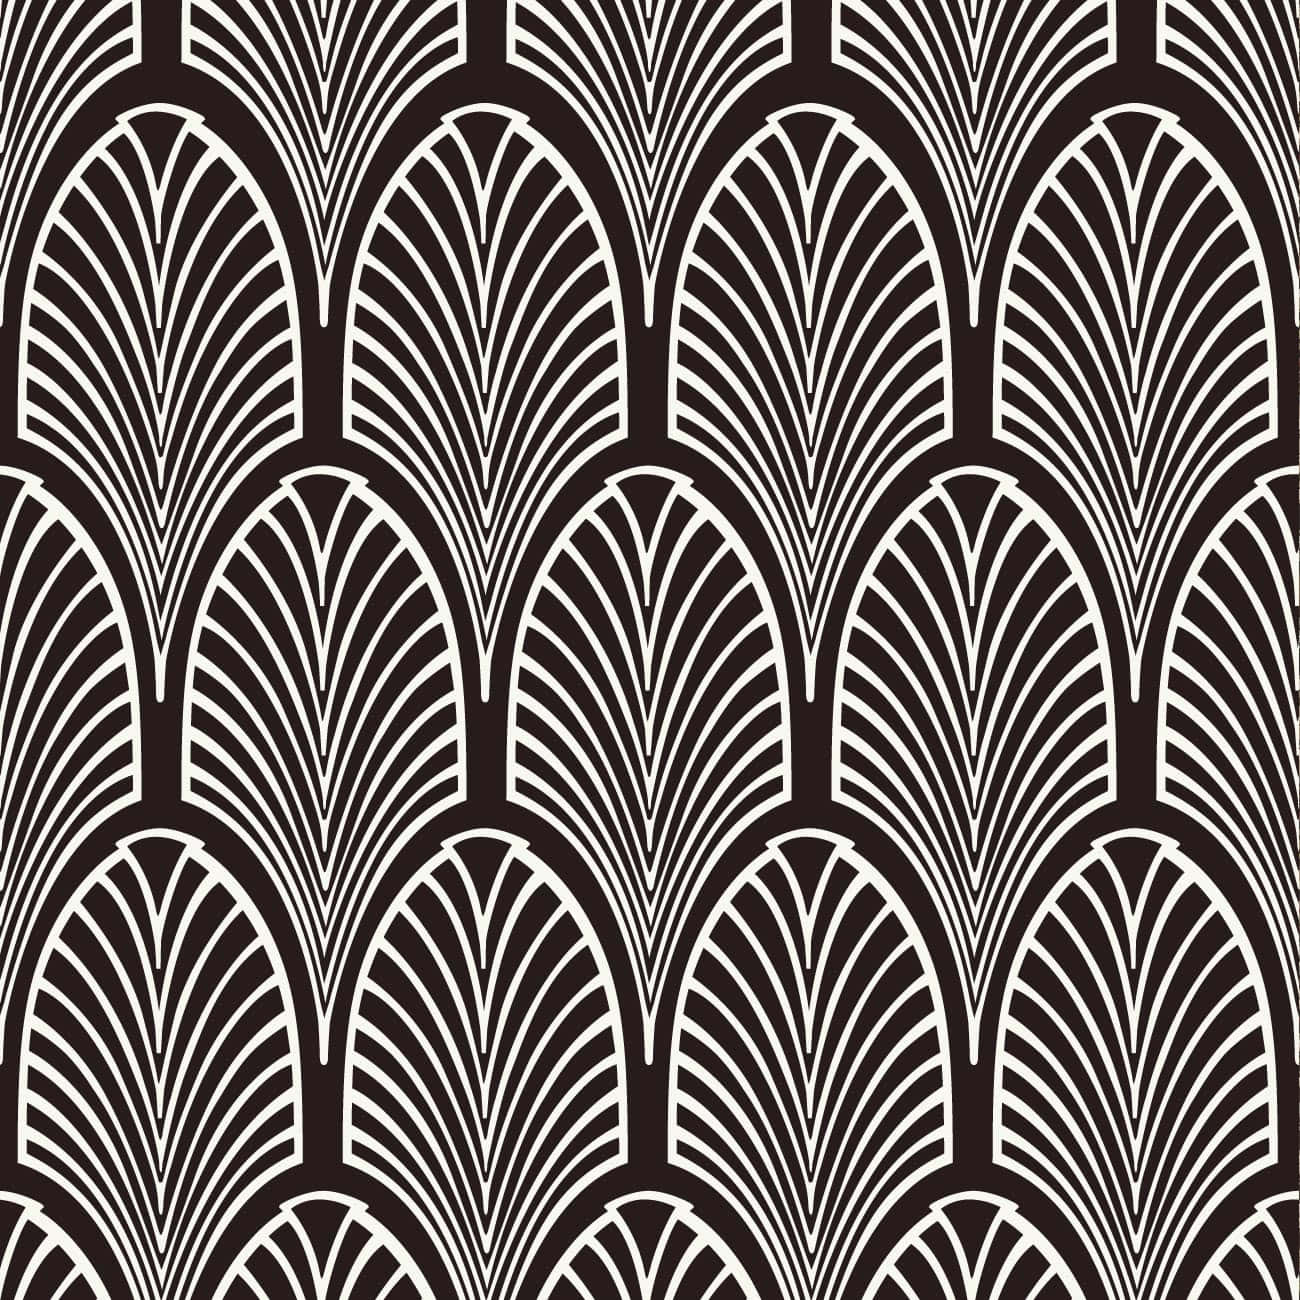 "Bringing the style and elegance of the Art Deco movement to the Digital Age" Wallpaper